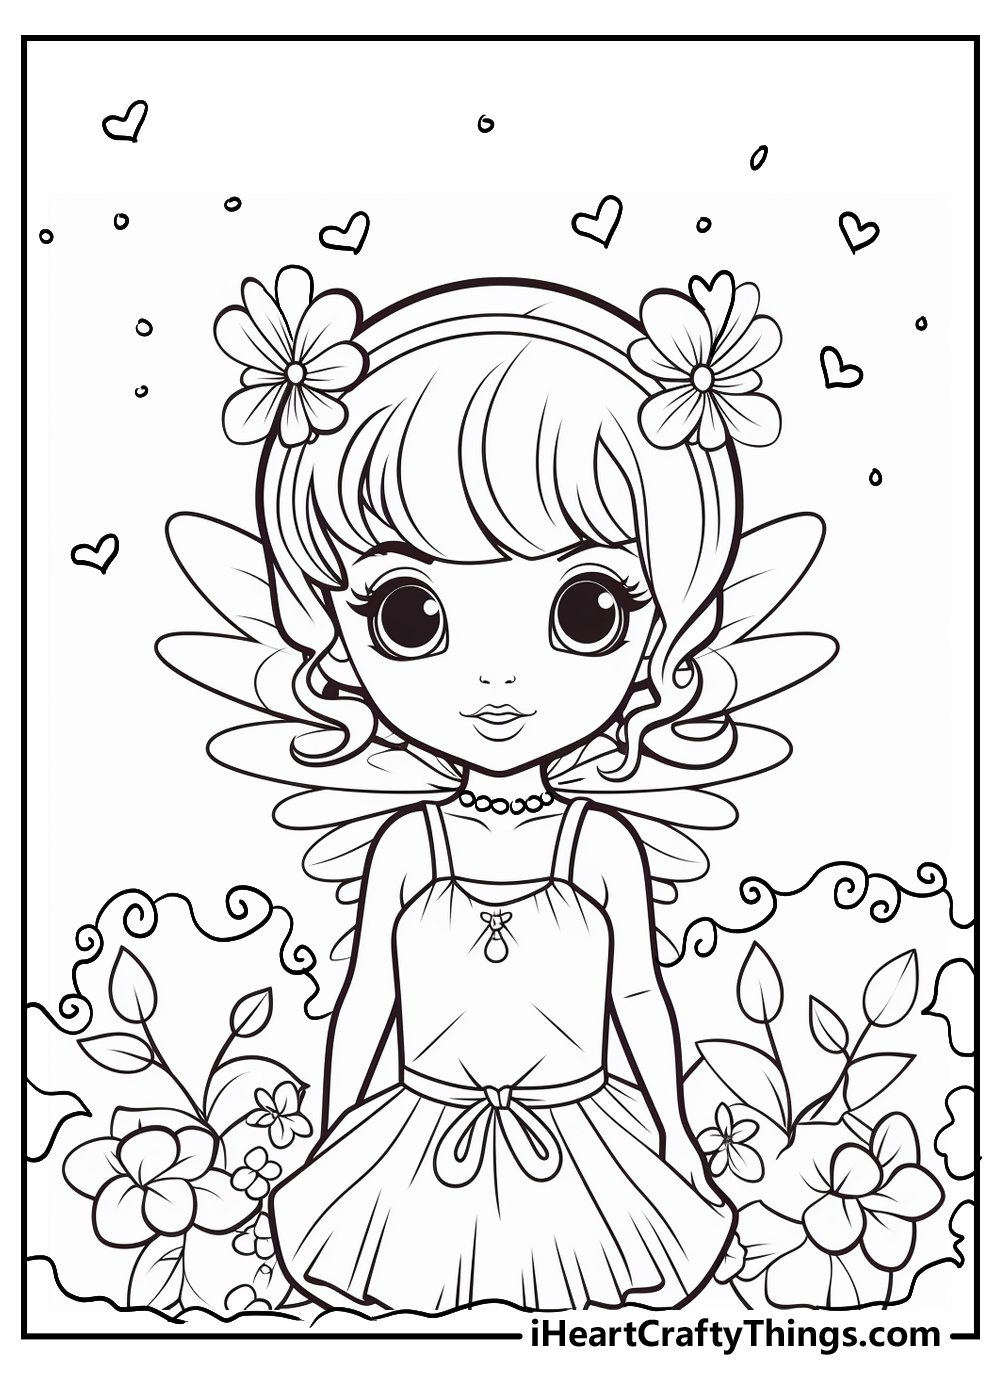 Fairy Coloring Pages: 190+ Fantasy Enchanting Pages to Spark Your Imagination 199